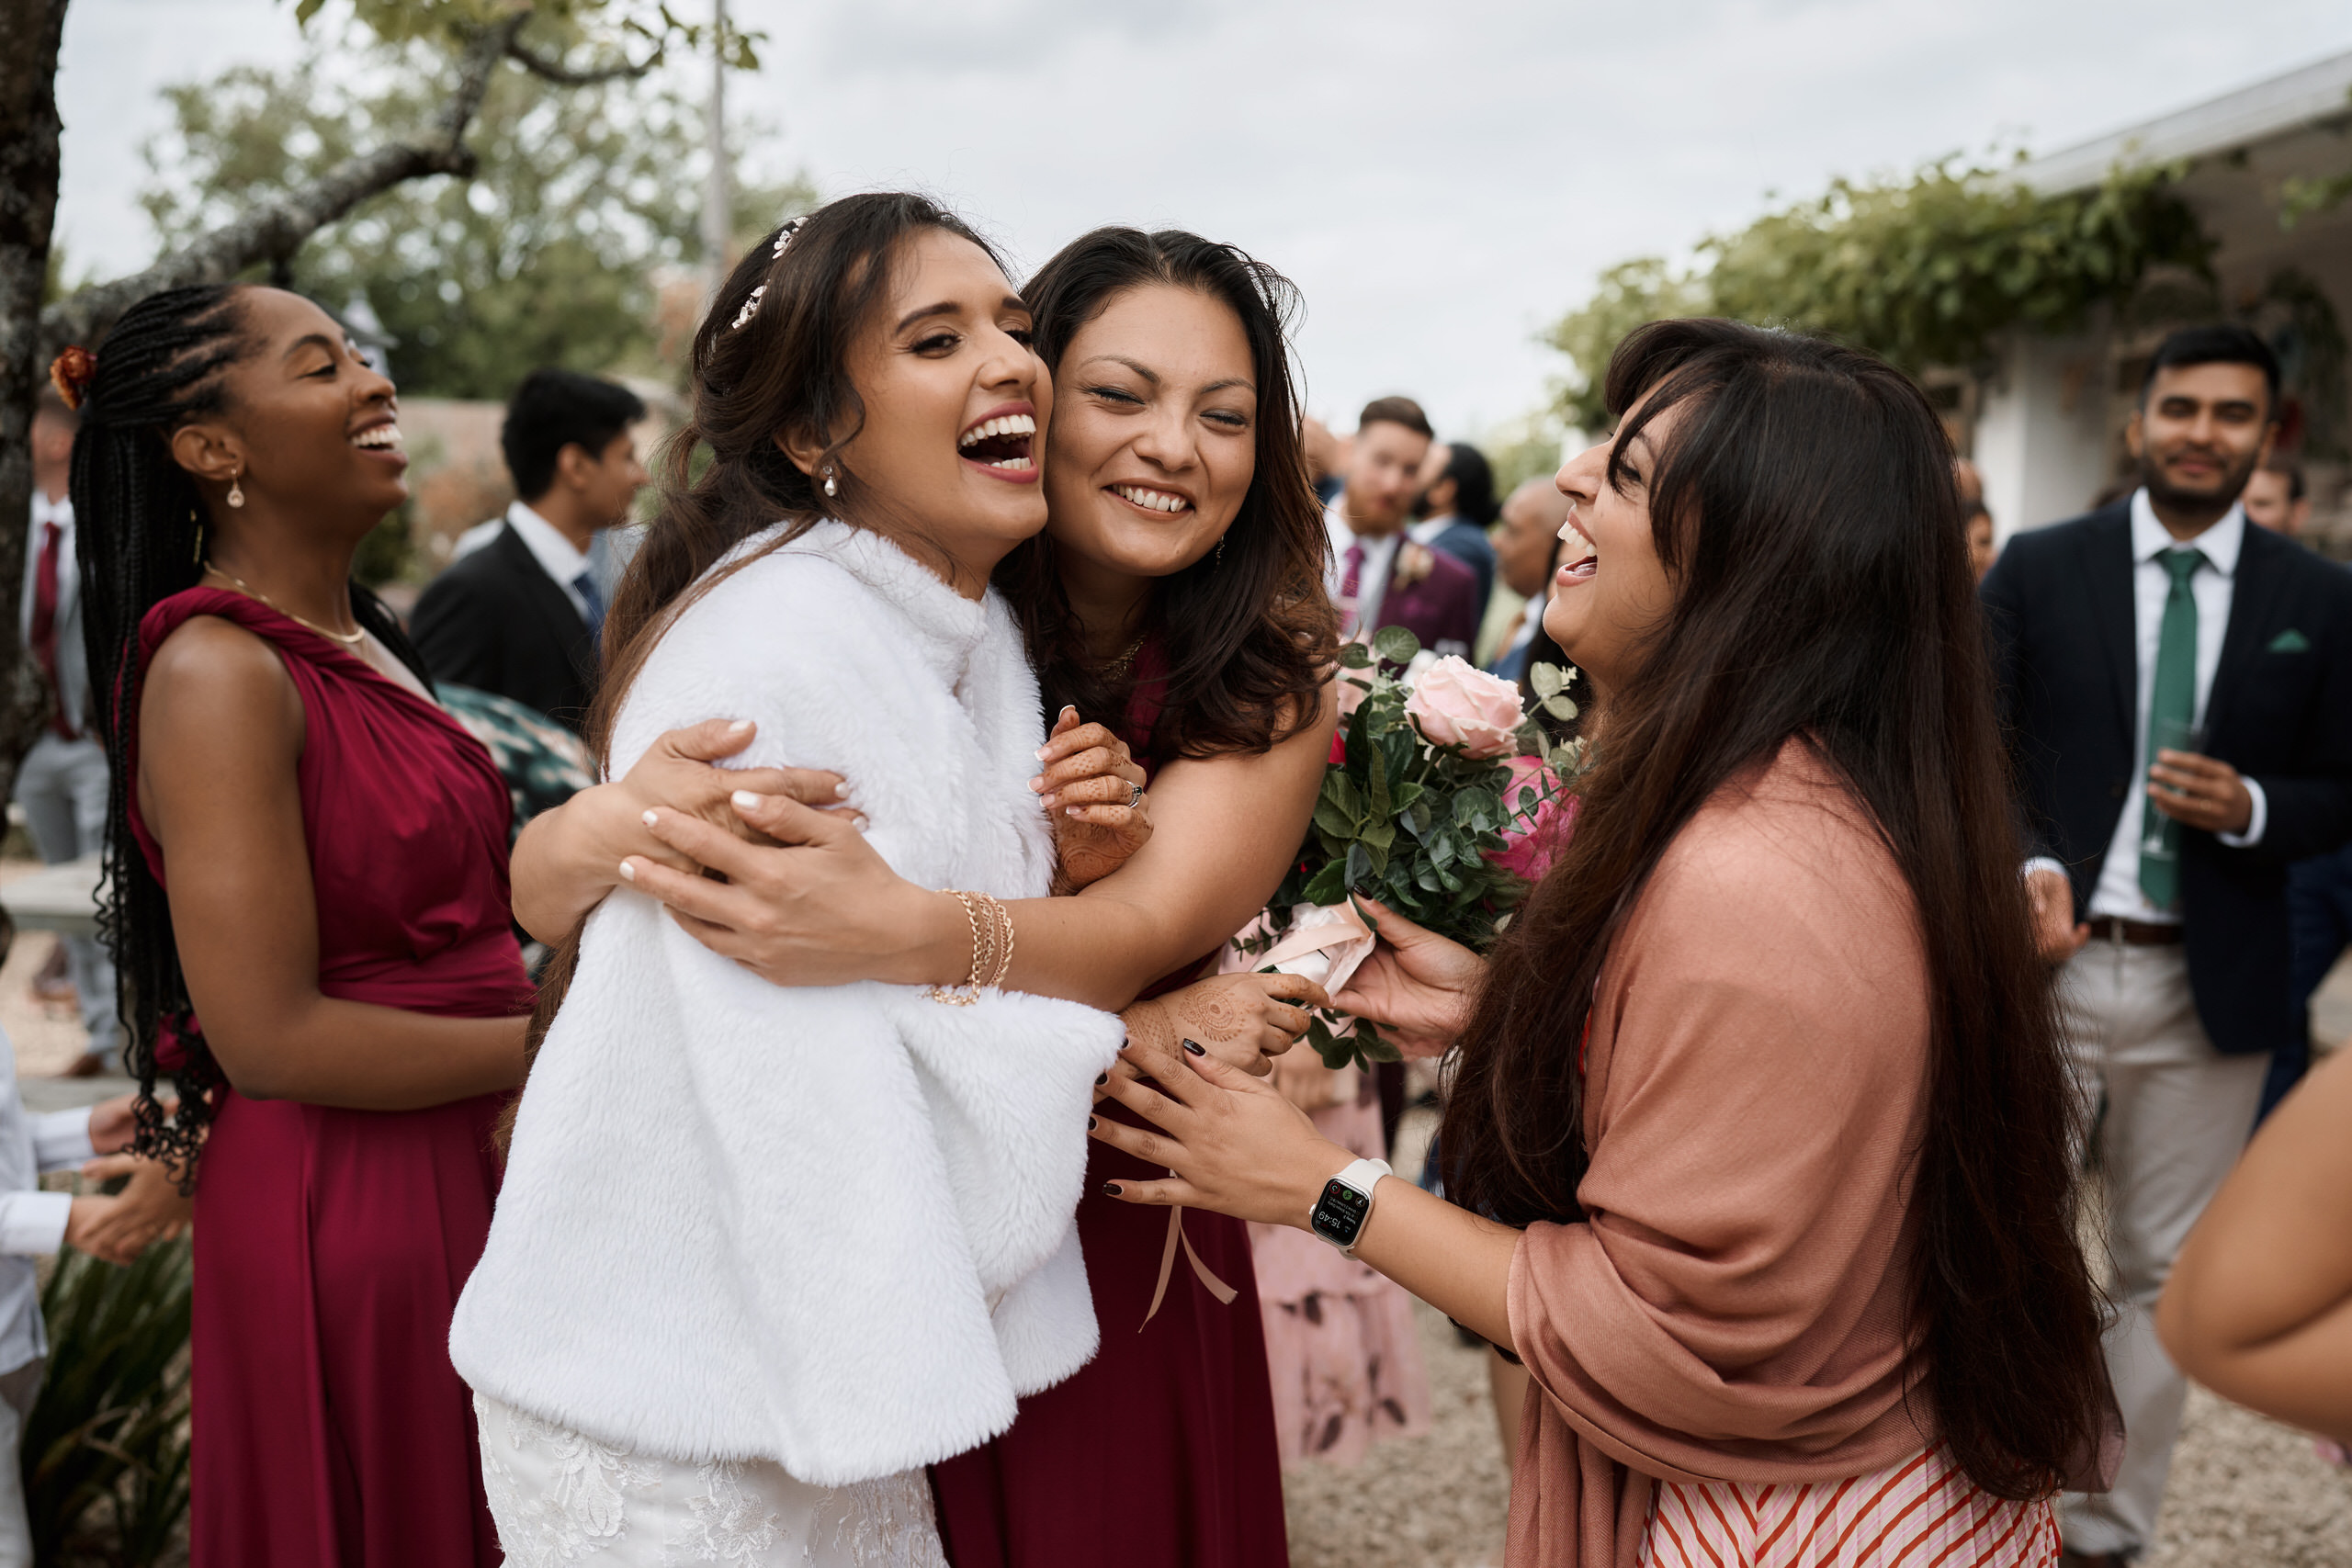 A bunch of bridesmaids are giving each other hugs at a wedding party.